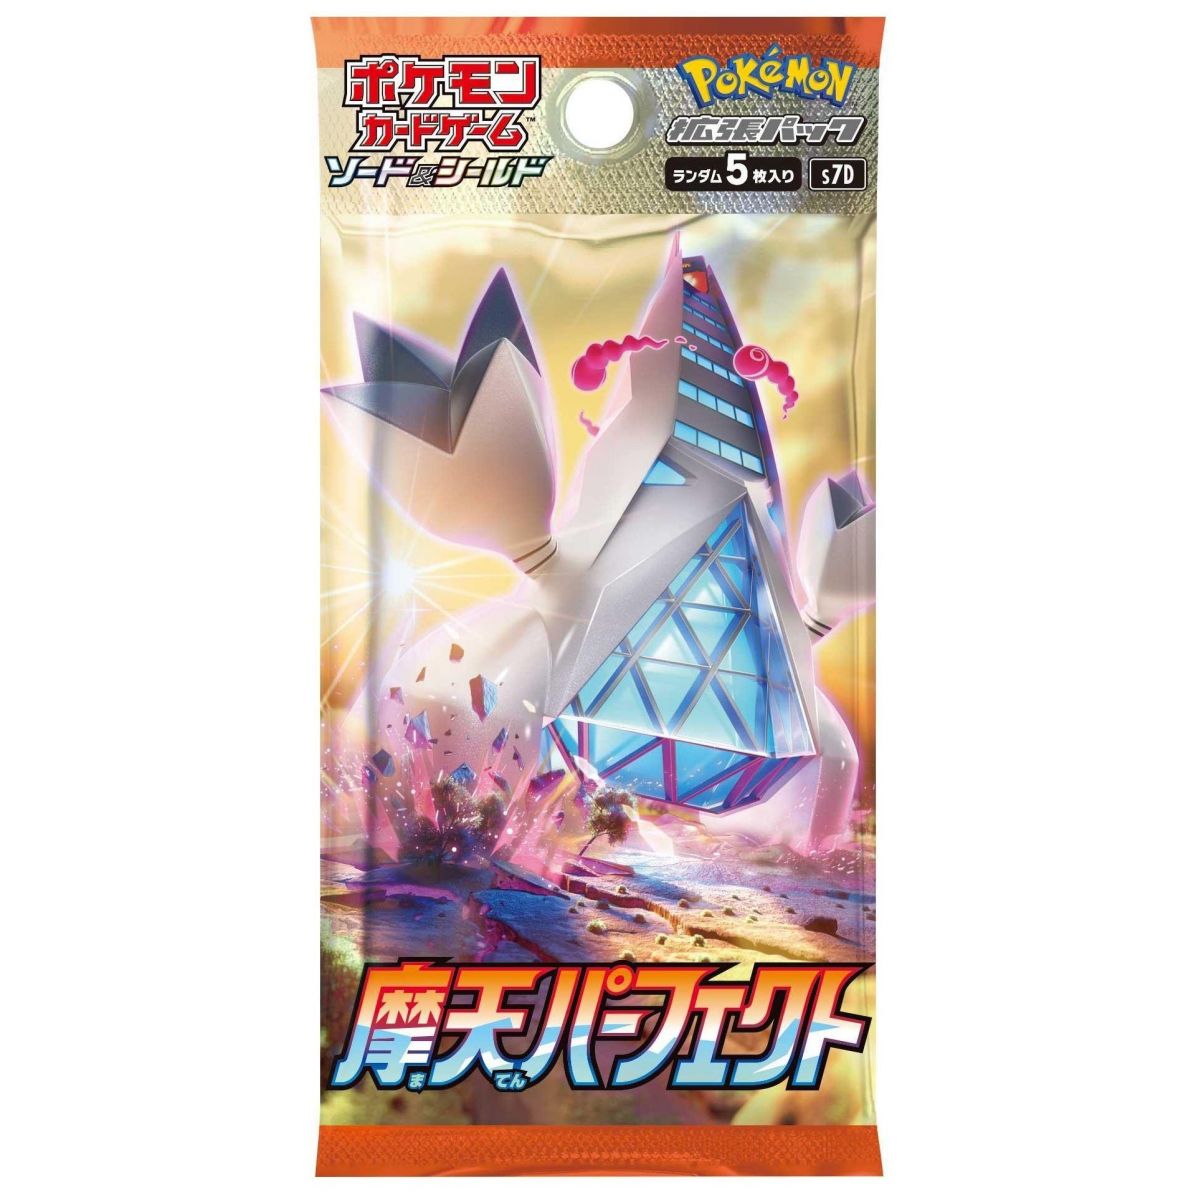 Pokémon - Boosters -Towering Perfection [S7D] - JP